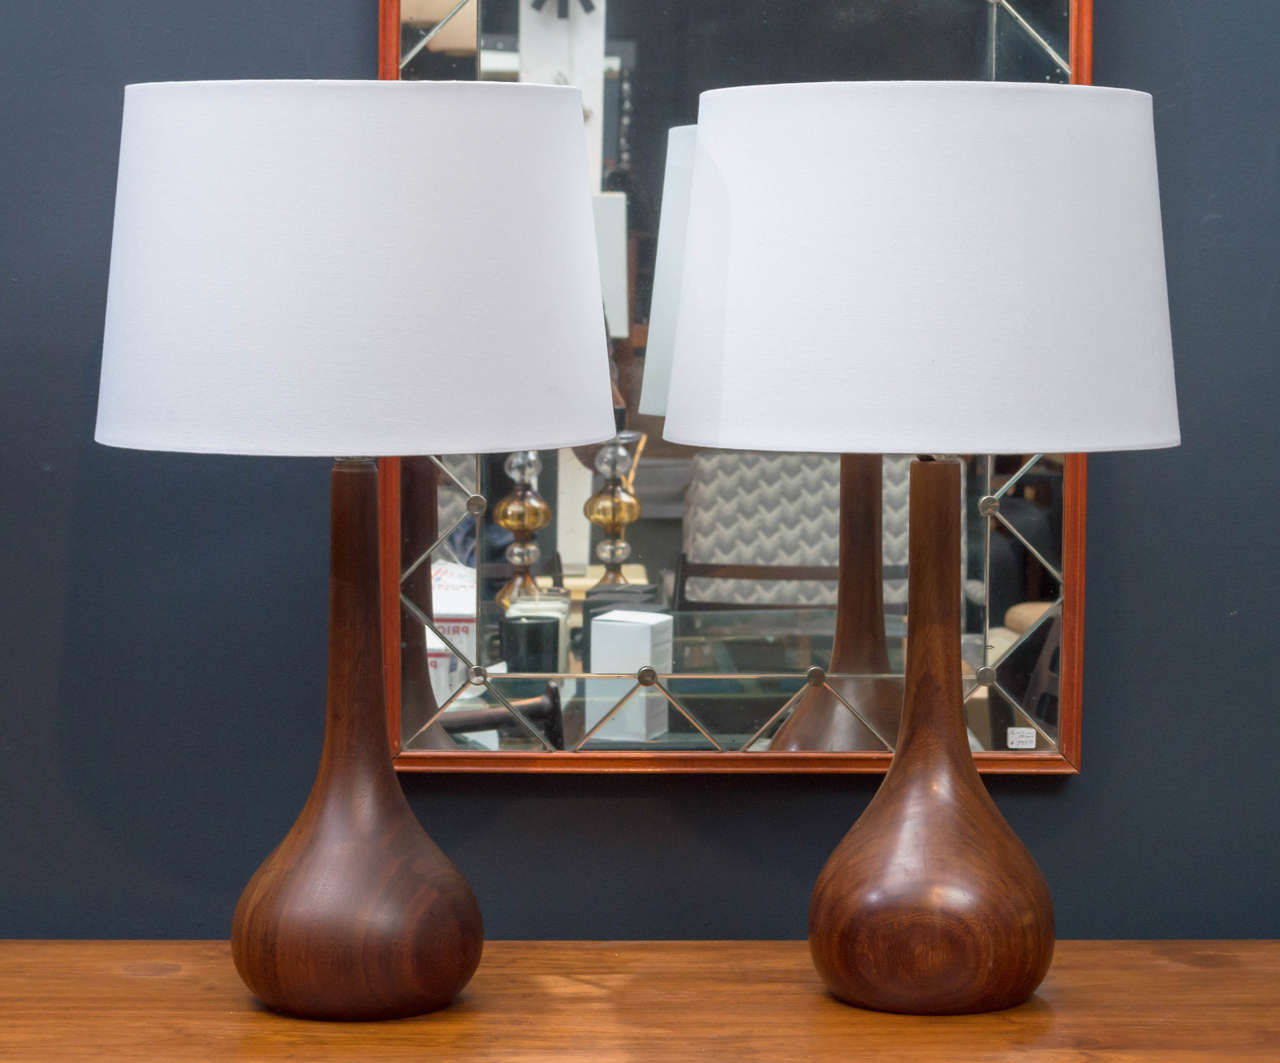 Organic modern solid wood table lamp, simple and sleek. One available only